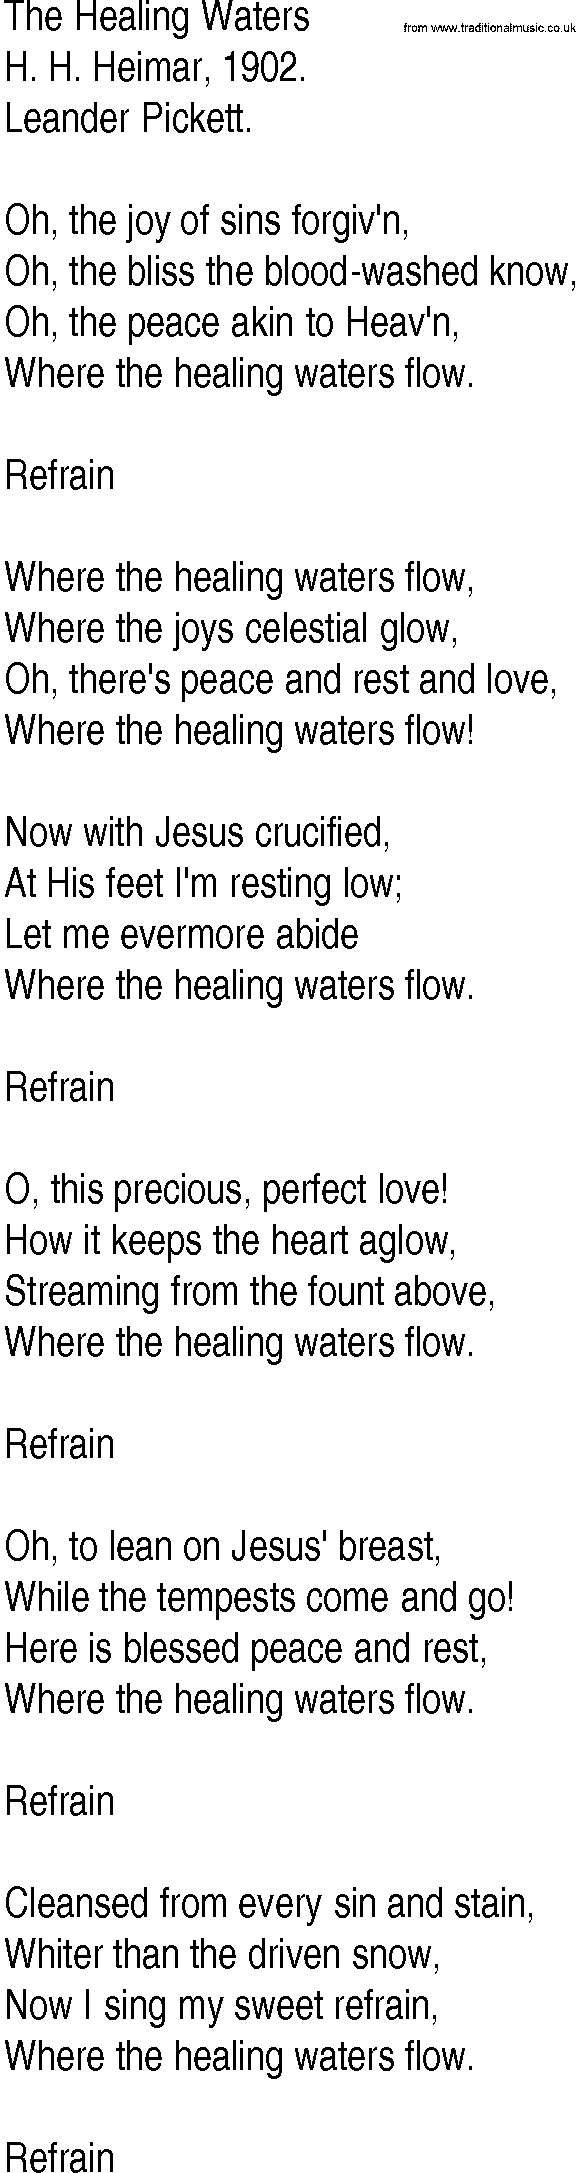 Hymn and Gospel Song: The Healing Waters by H H Heimar lyrics